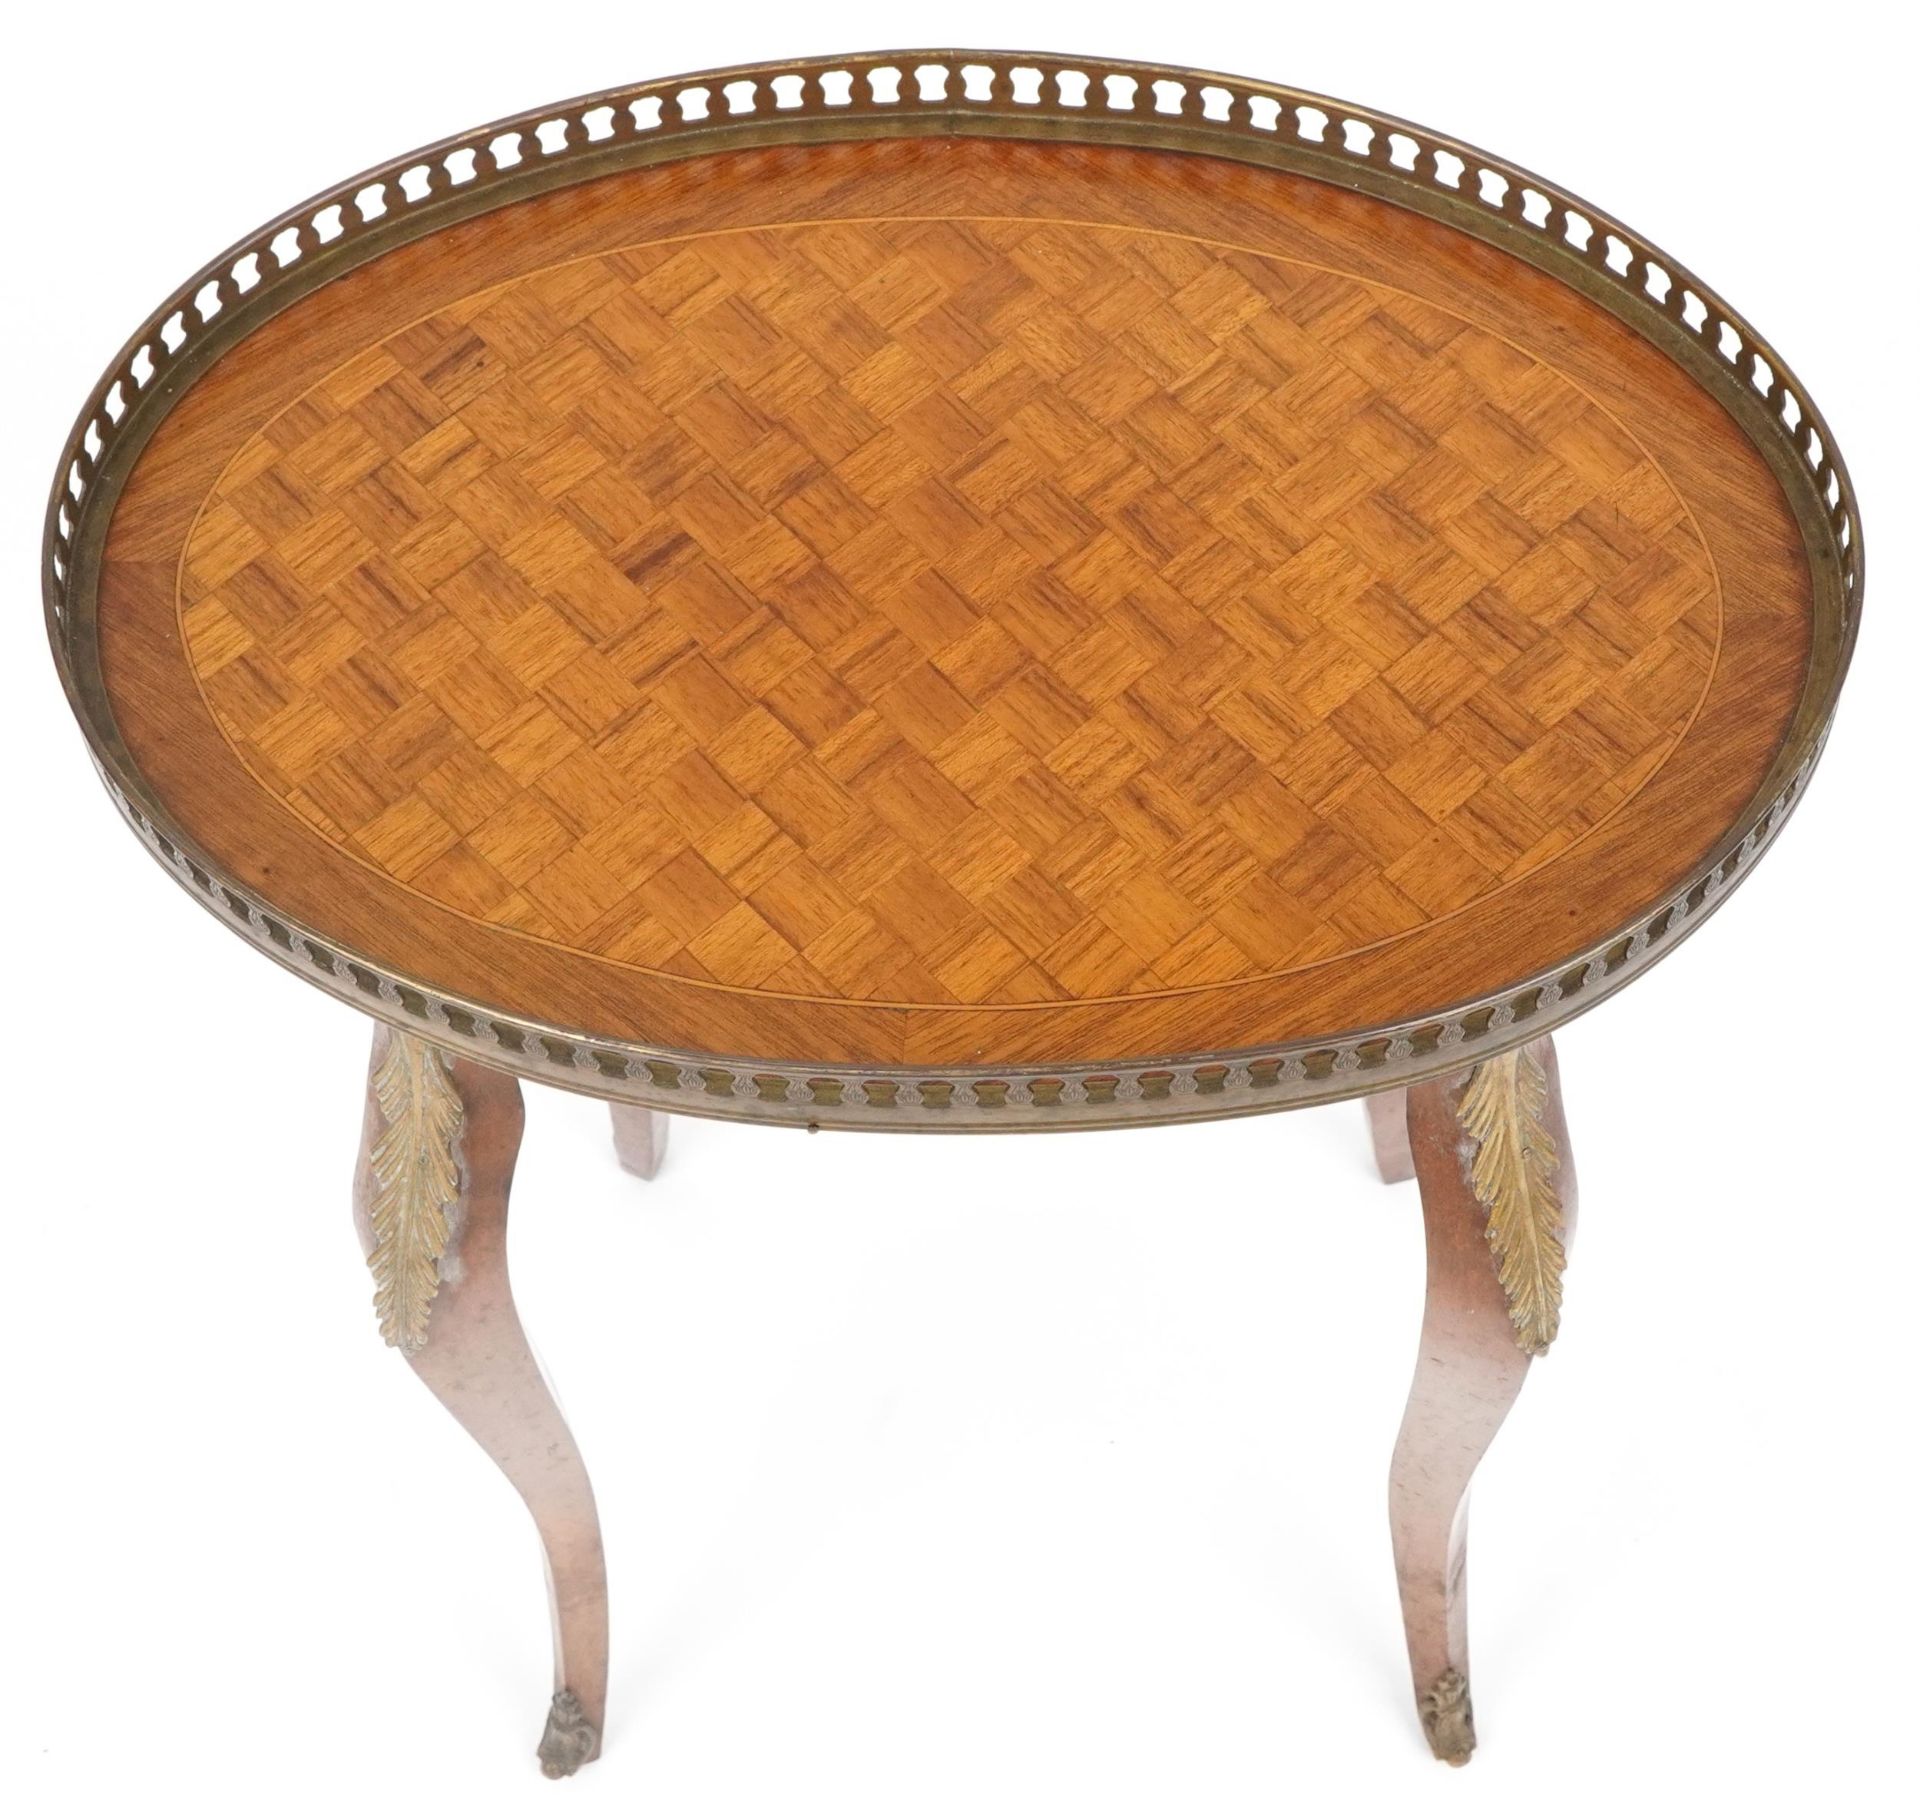 French inlaid kingwood side table with oval top having an engraved brass gallery, 59.5cm x 46cm W - Image 3 of 5